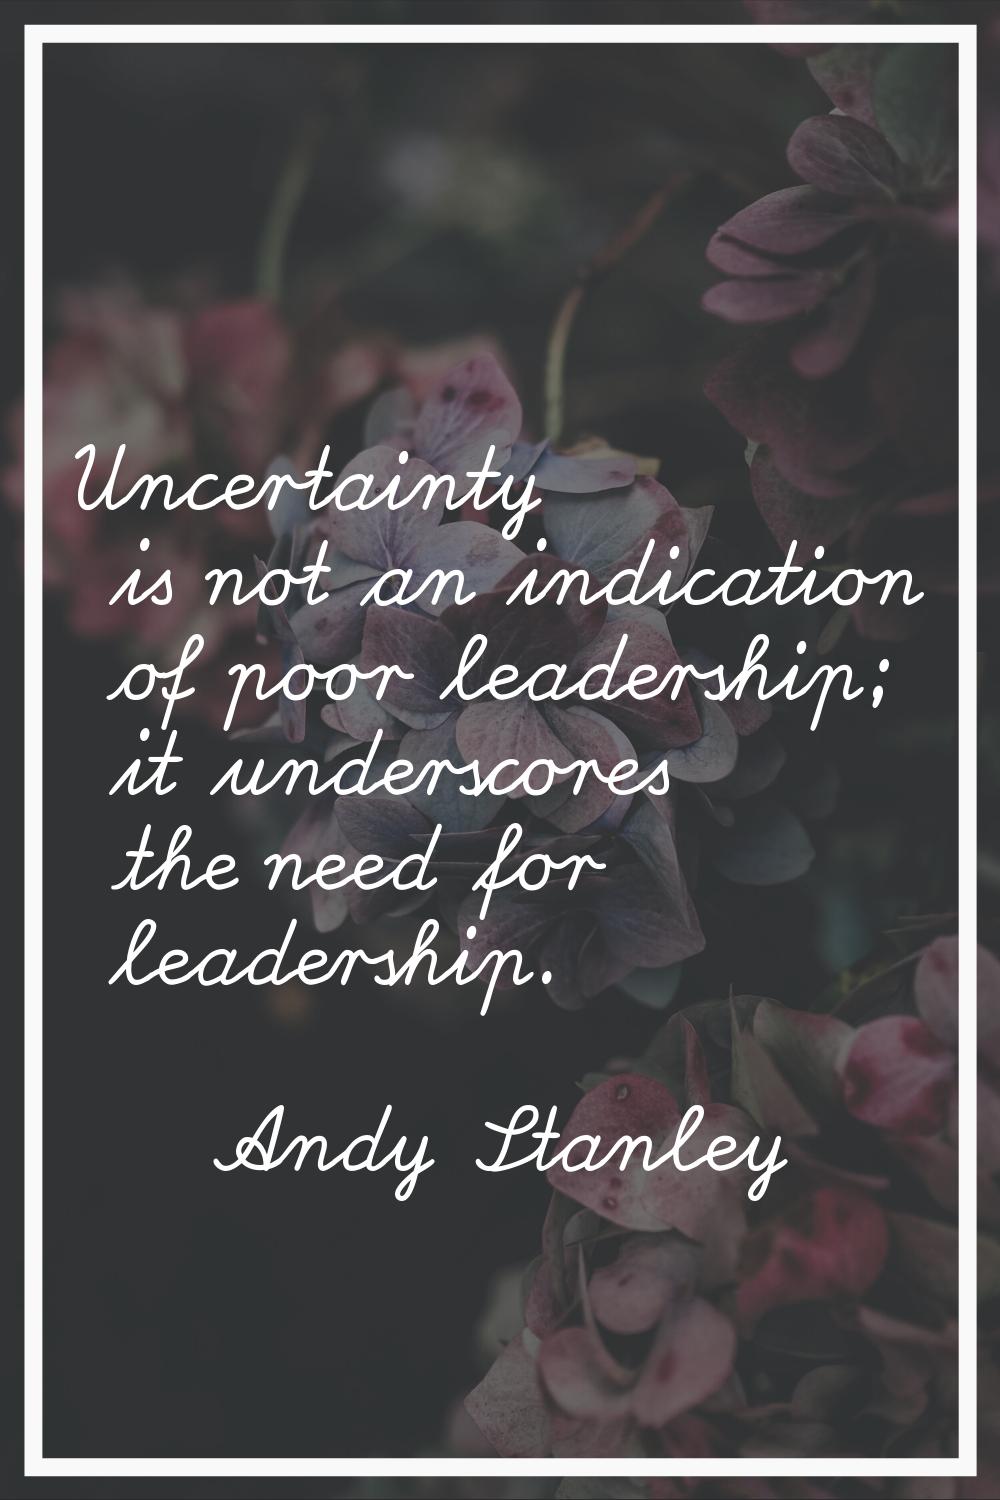 Uncertainty is not an indication of poor leadership; it underscores the need for leadership.